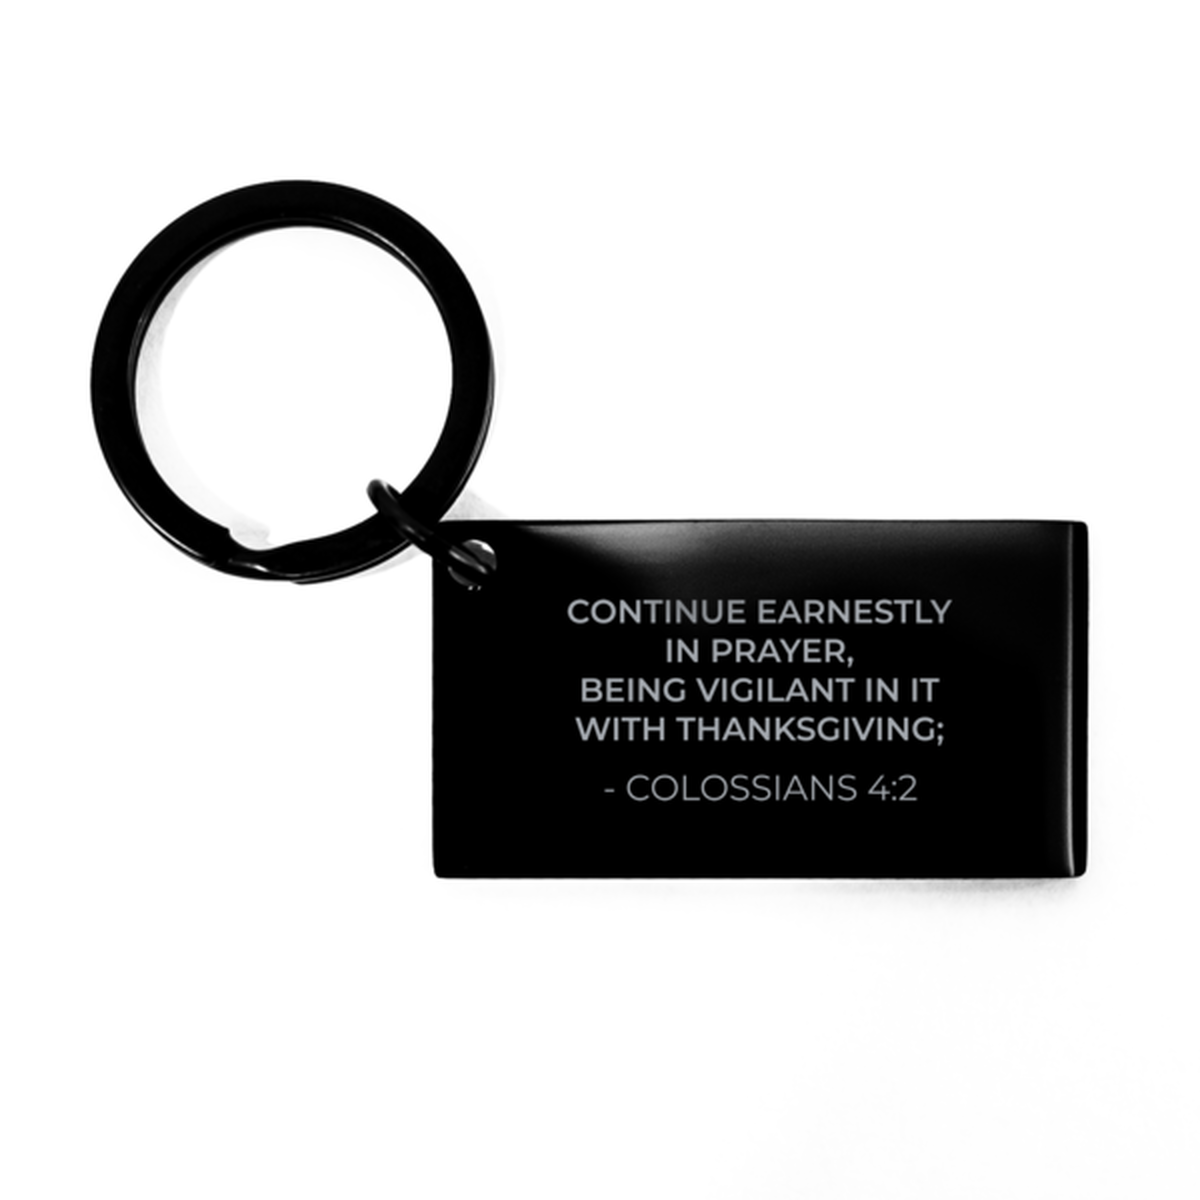 Bible Verse Black Keychain, Colossians 4:2 Continue Earnestly In Prayer, Being Vigilant, Christian Inspirational Key Ring Gifts For Men Women